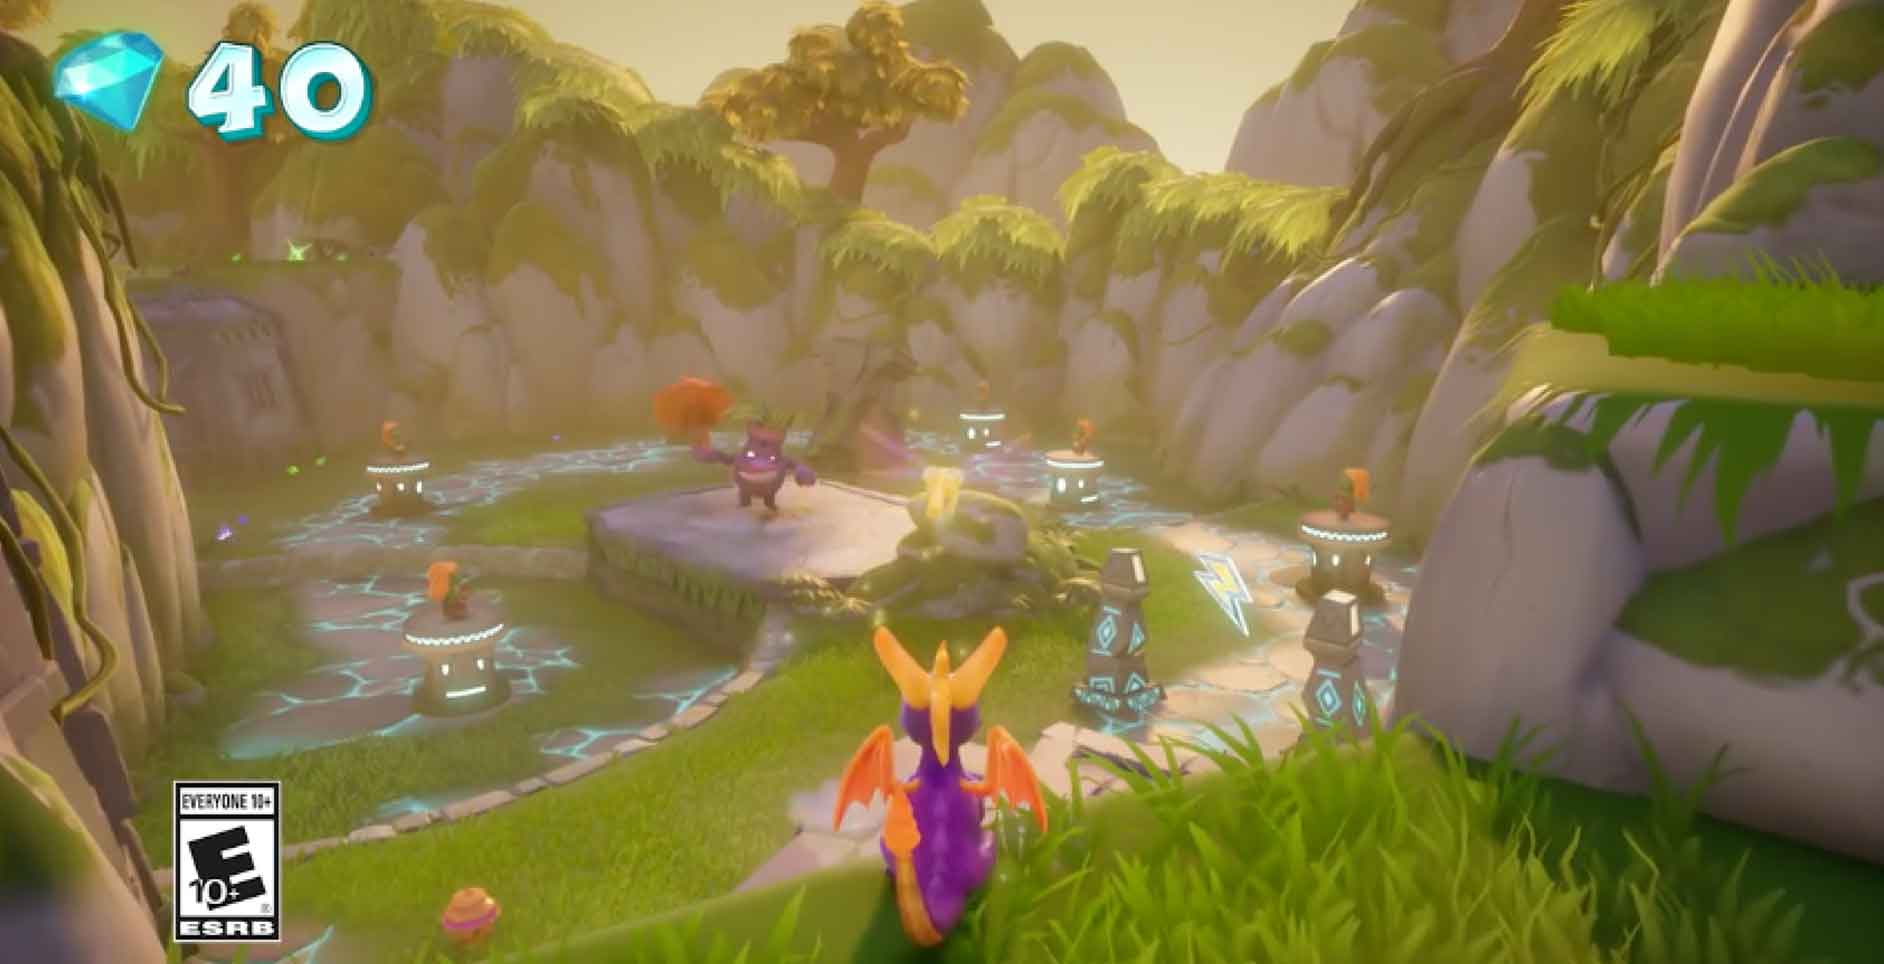 Here's 12 Minutes Of New Spyro: Reignited Trilogy Gameplay